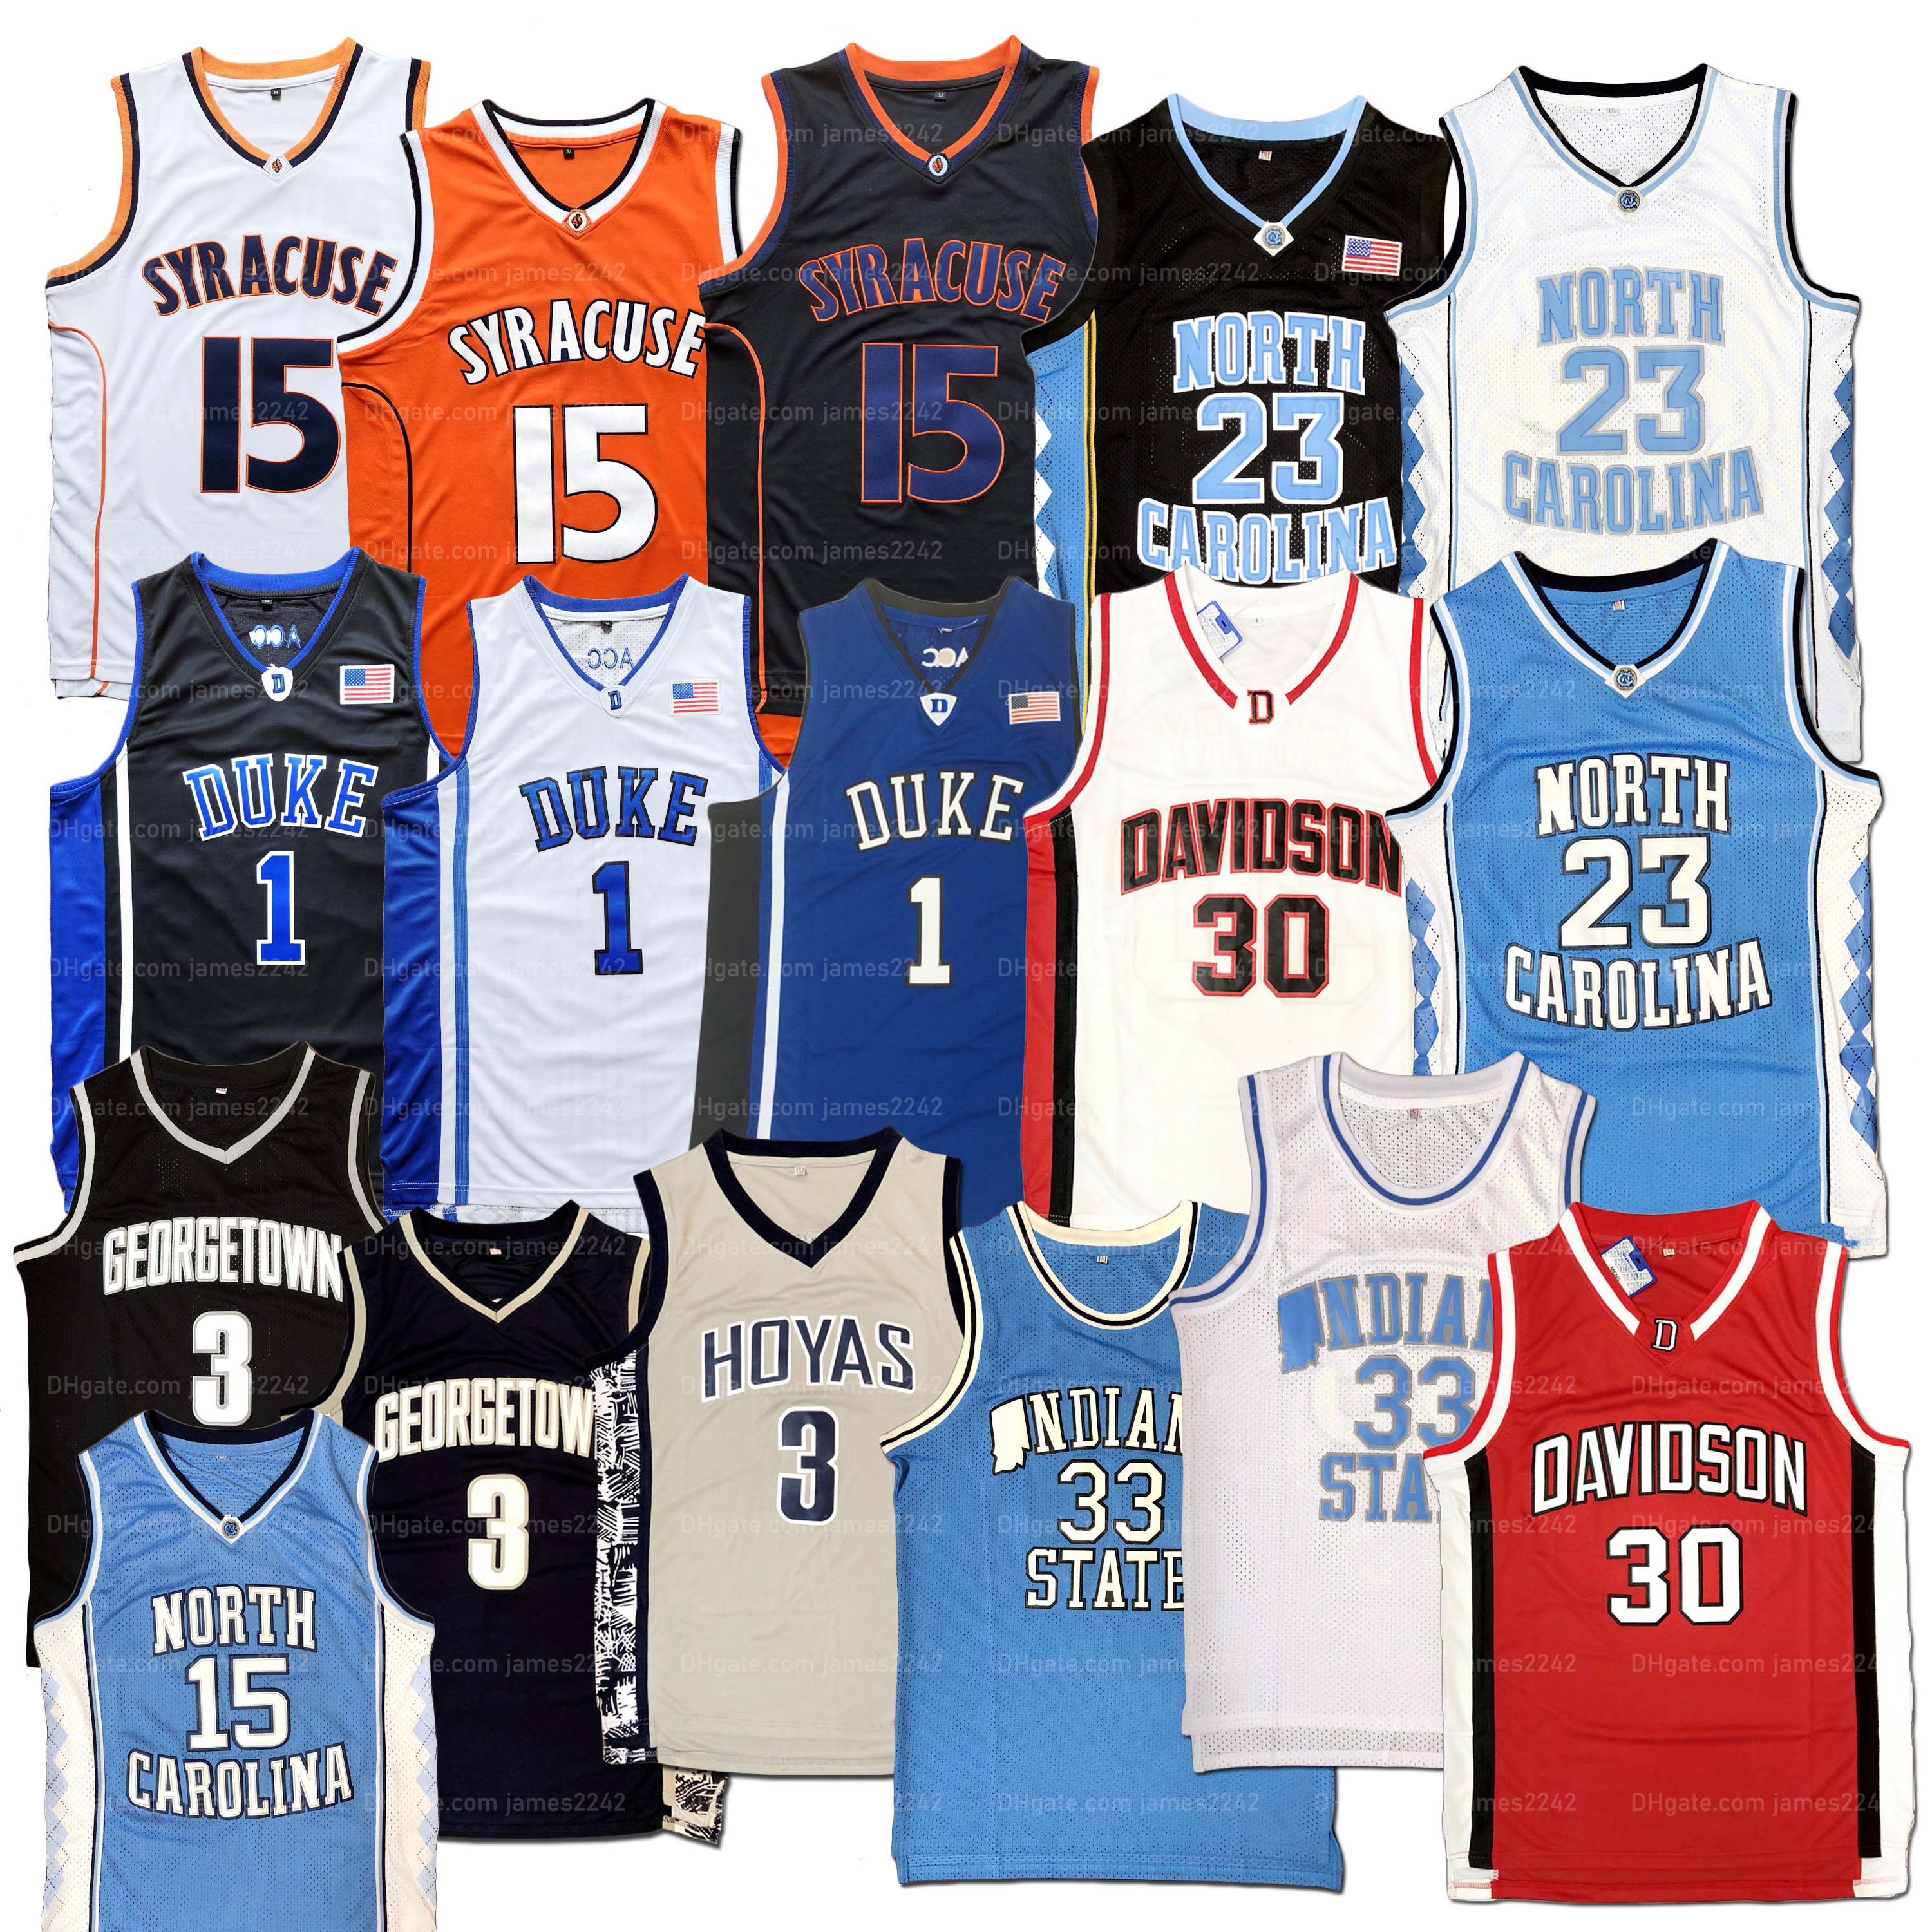 

College Michael MJ #23 Basketball Jersey North Carolina TAR HEELS Kyrie Irving Indiana State Allen Iverson Stephen Curry Carmelo Shirt, 15#orange